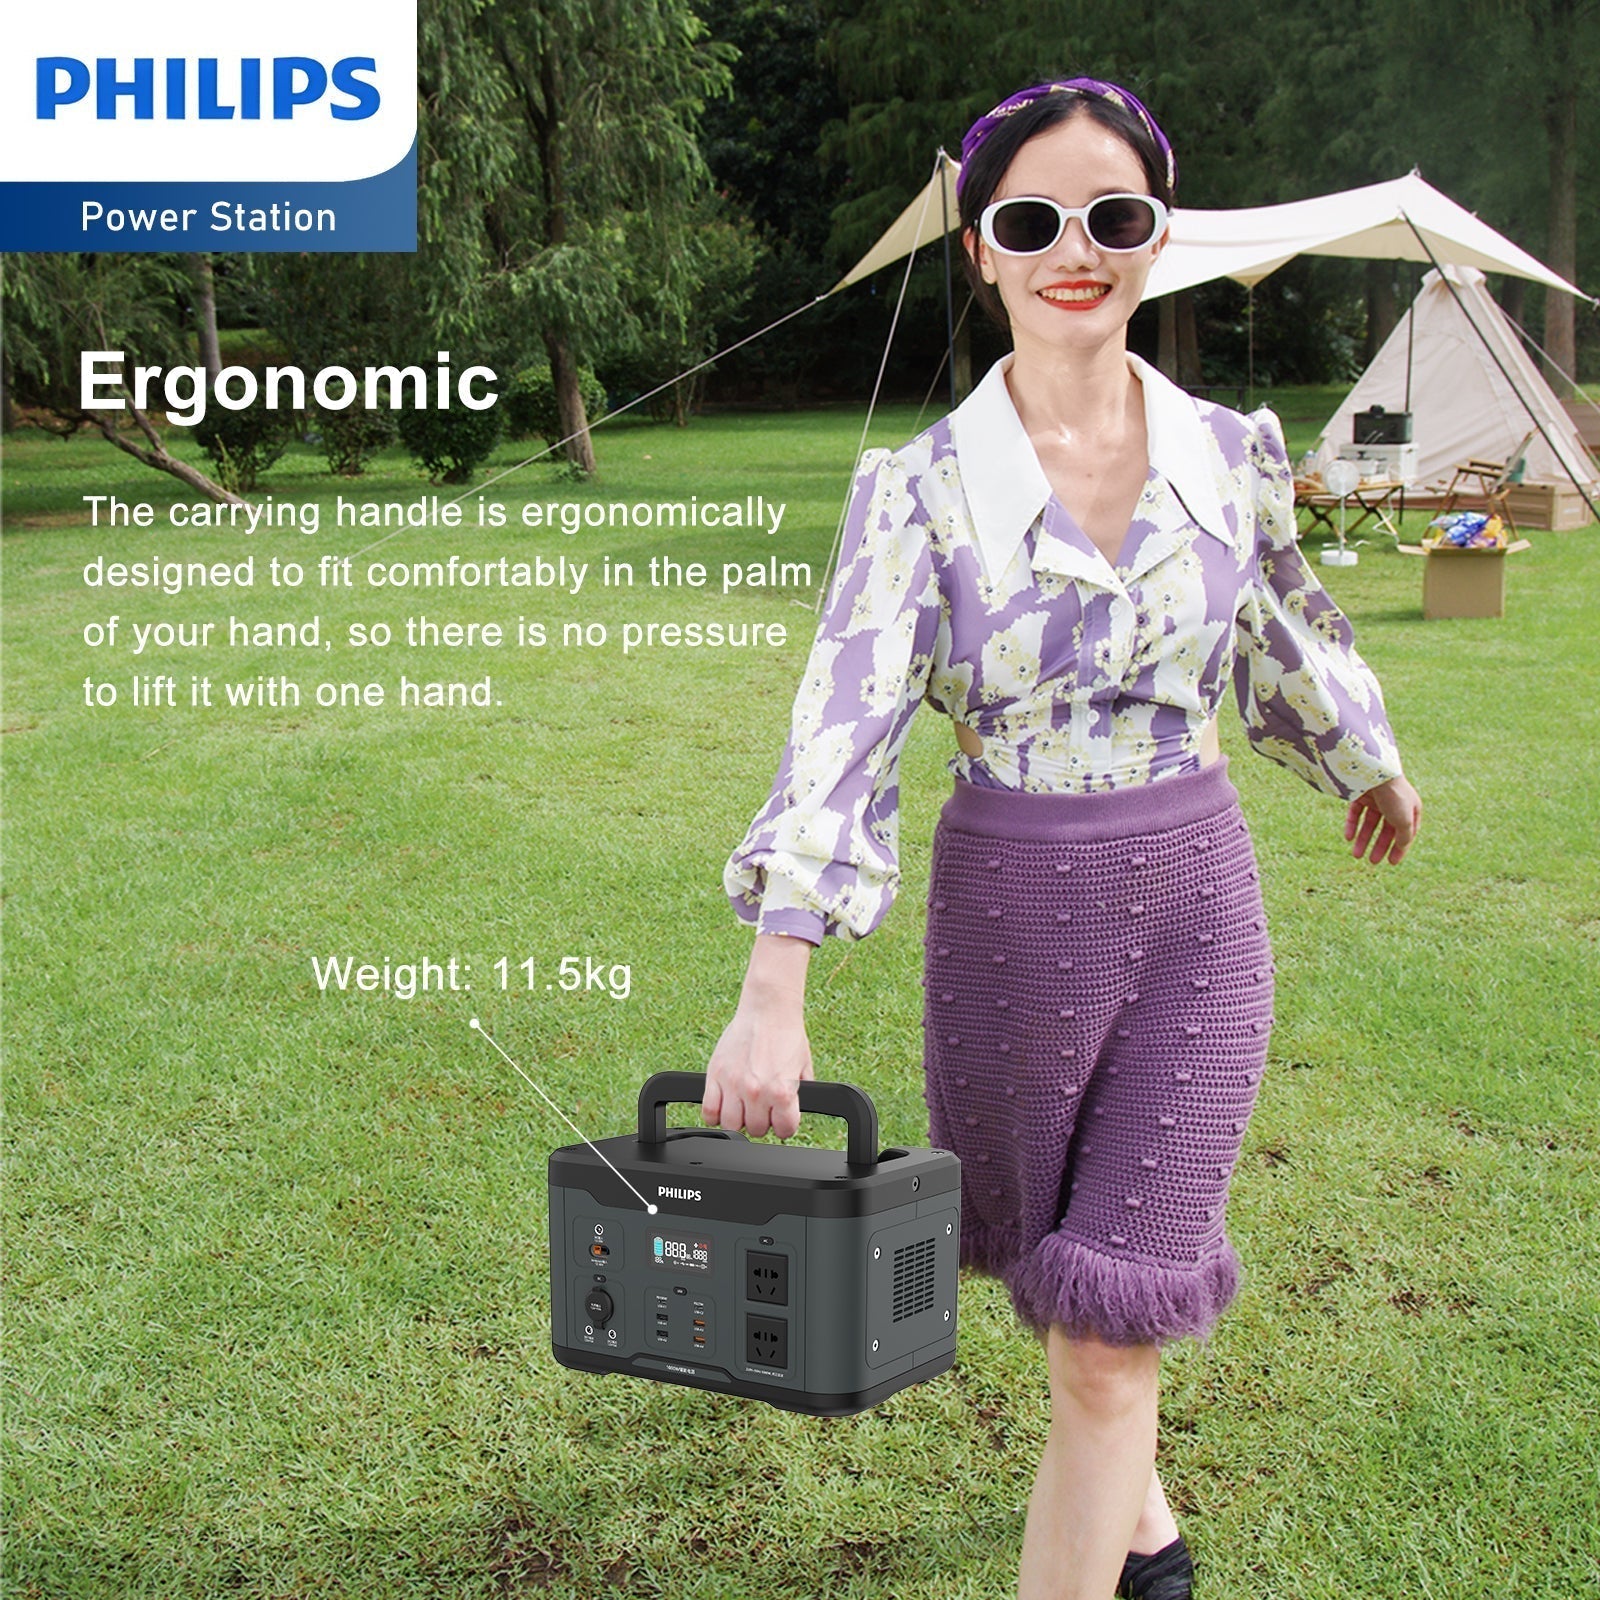 Philips Outdoor High Power 300W/600W/1000W Mobile Power Supply